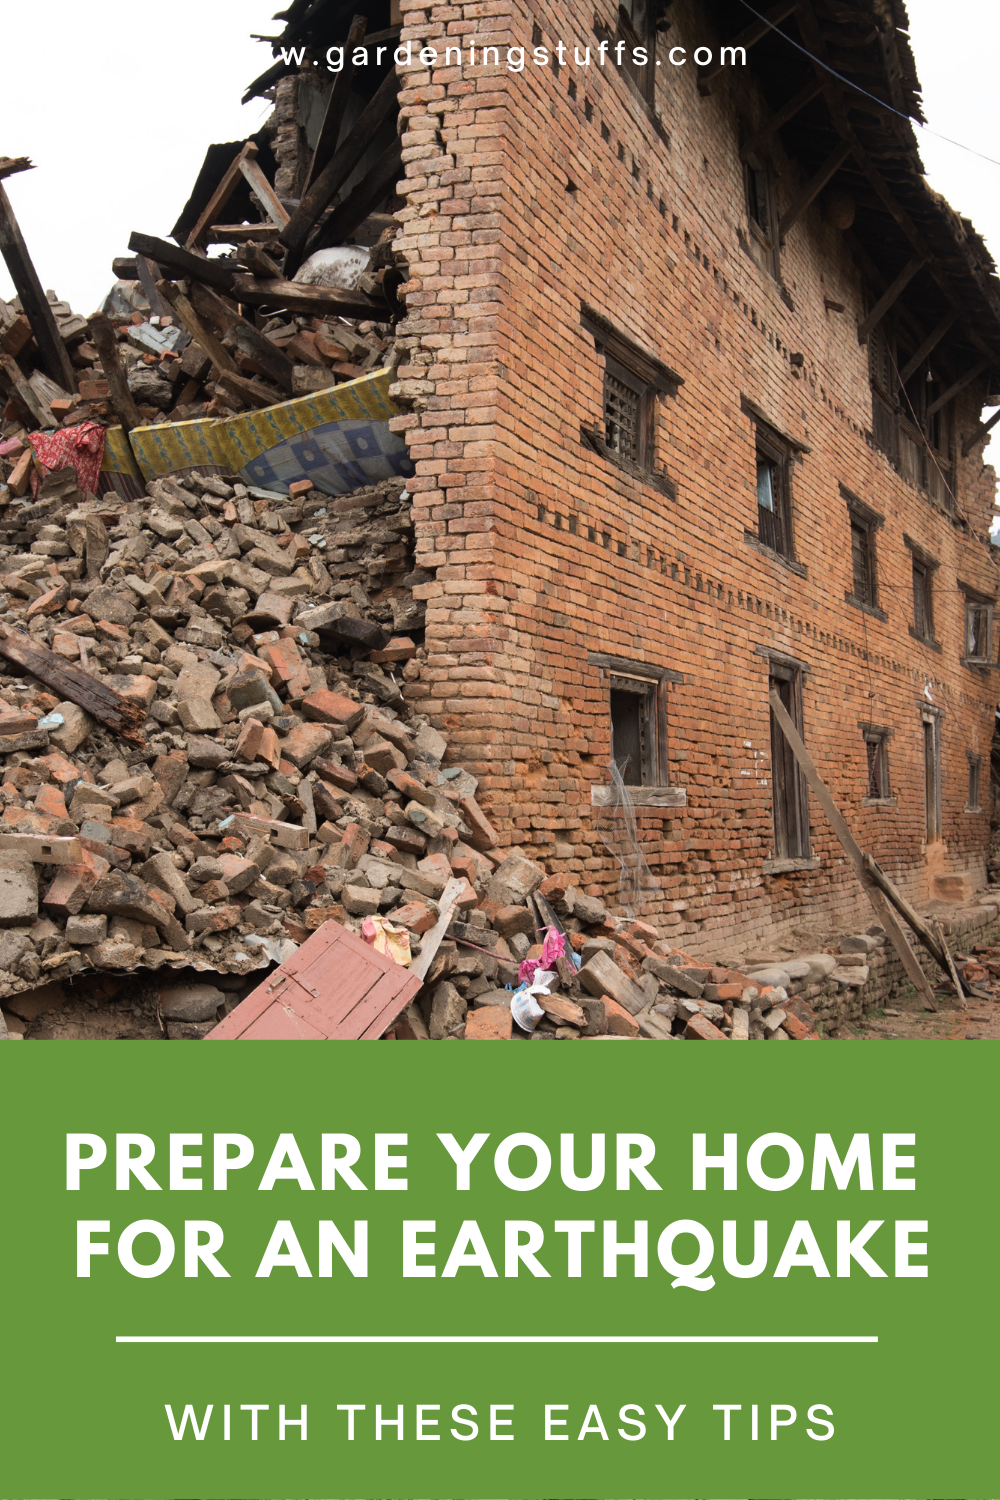 Prepare your home and property for an earthquake disaster with this guide and protect yourself and your family from potential hazards and injuries.